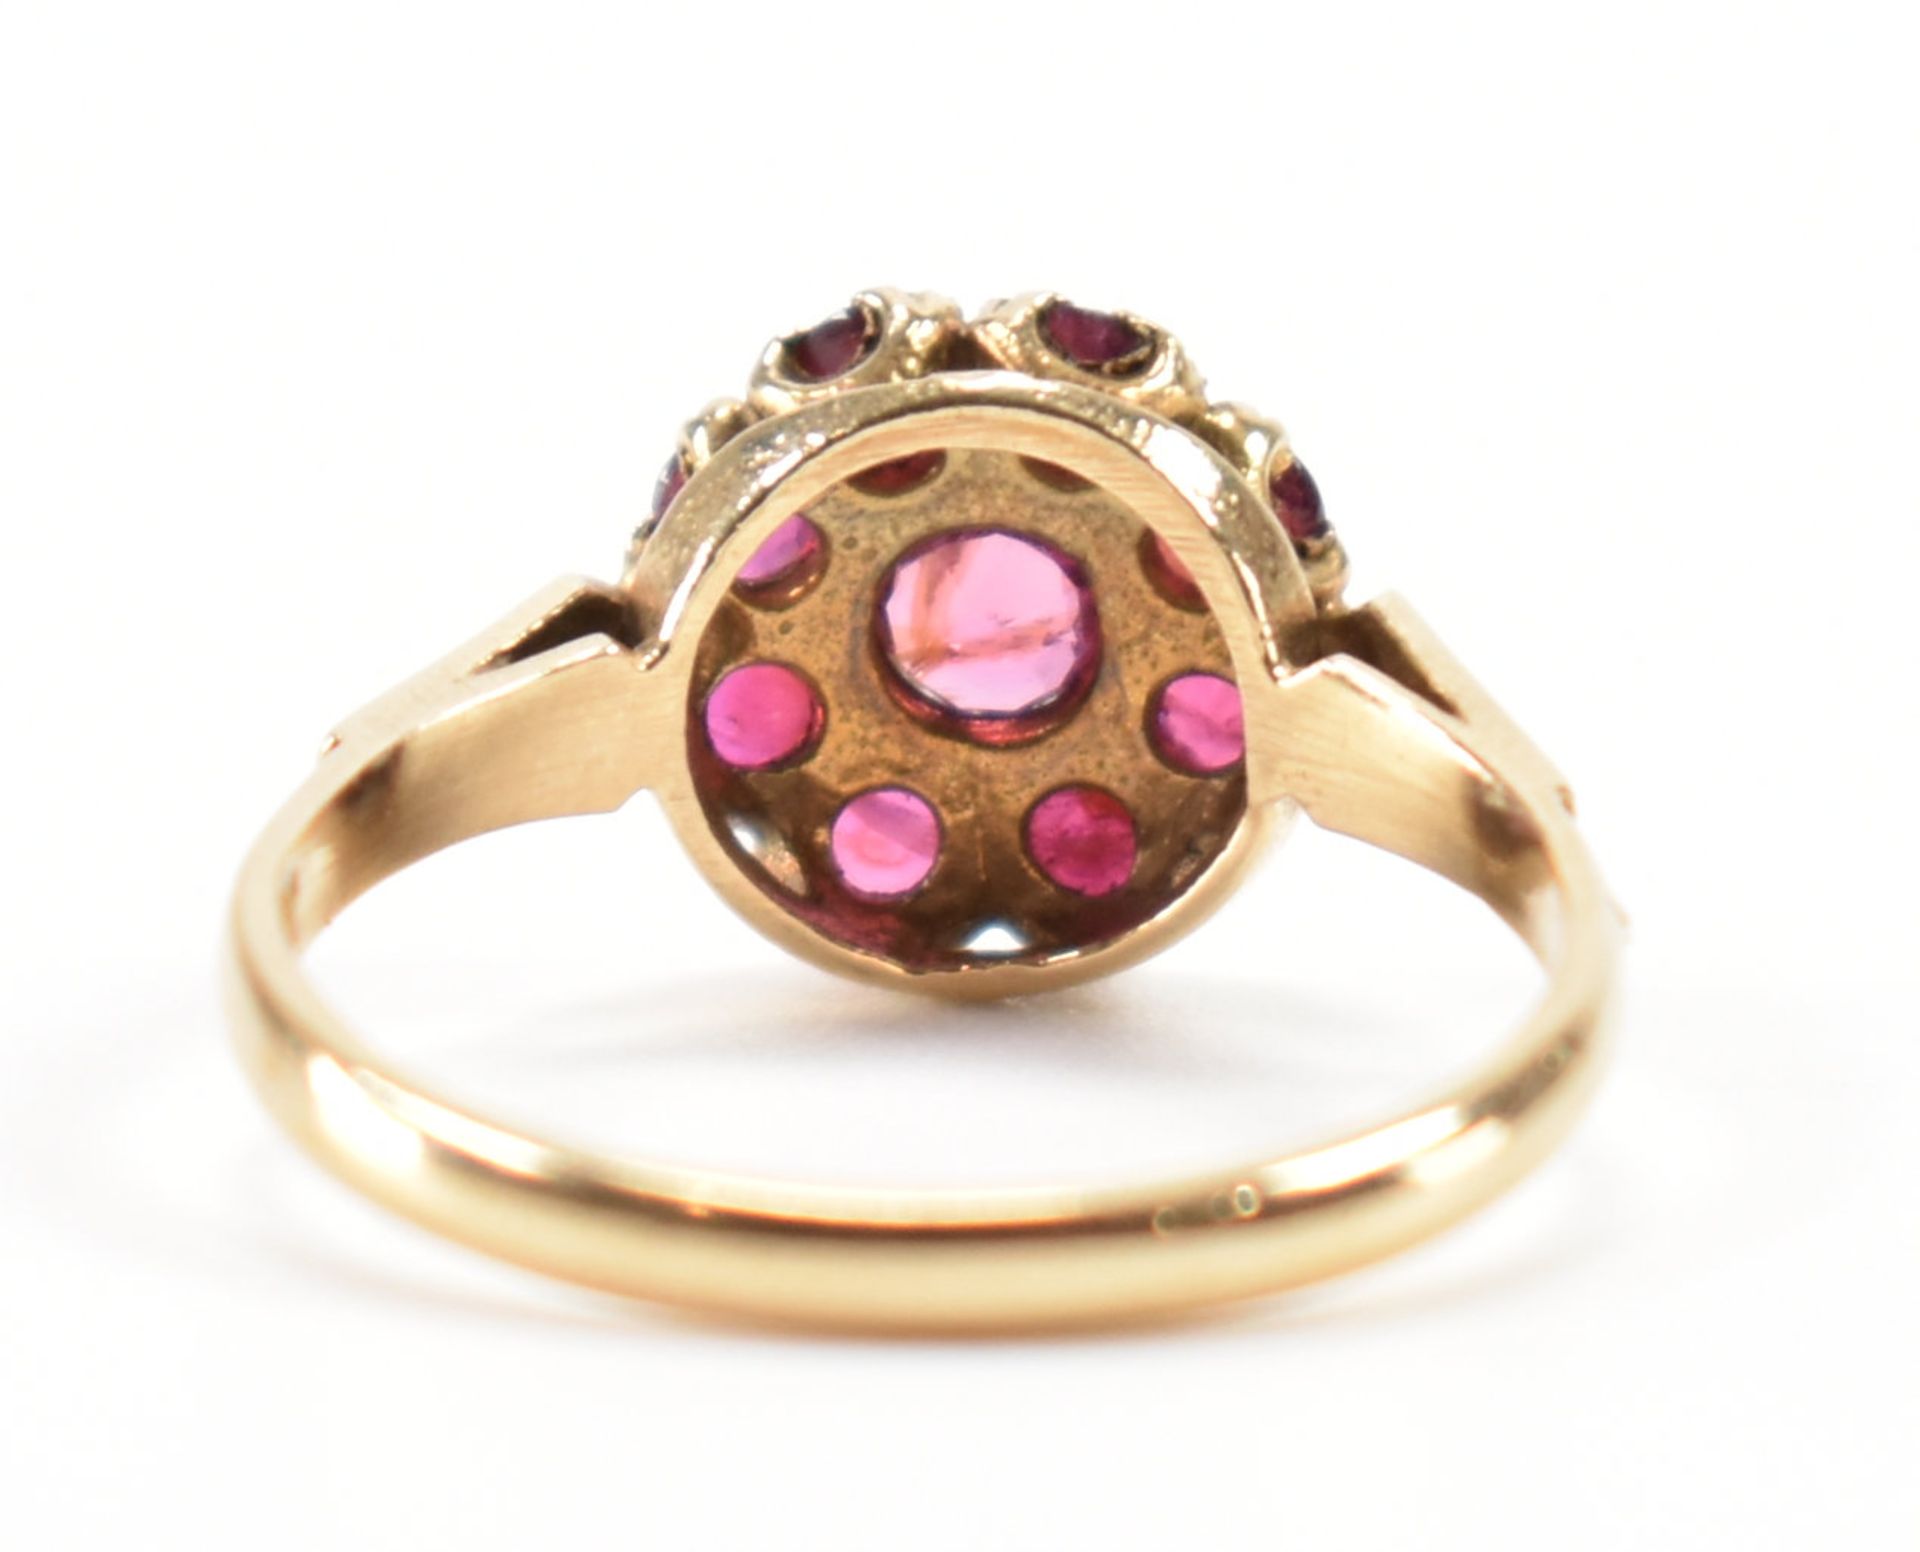 HALLMARKED 9CT GOLD & RUBY CLUSTER RING - Image 3 of 8